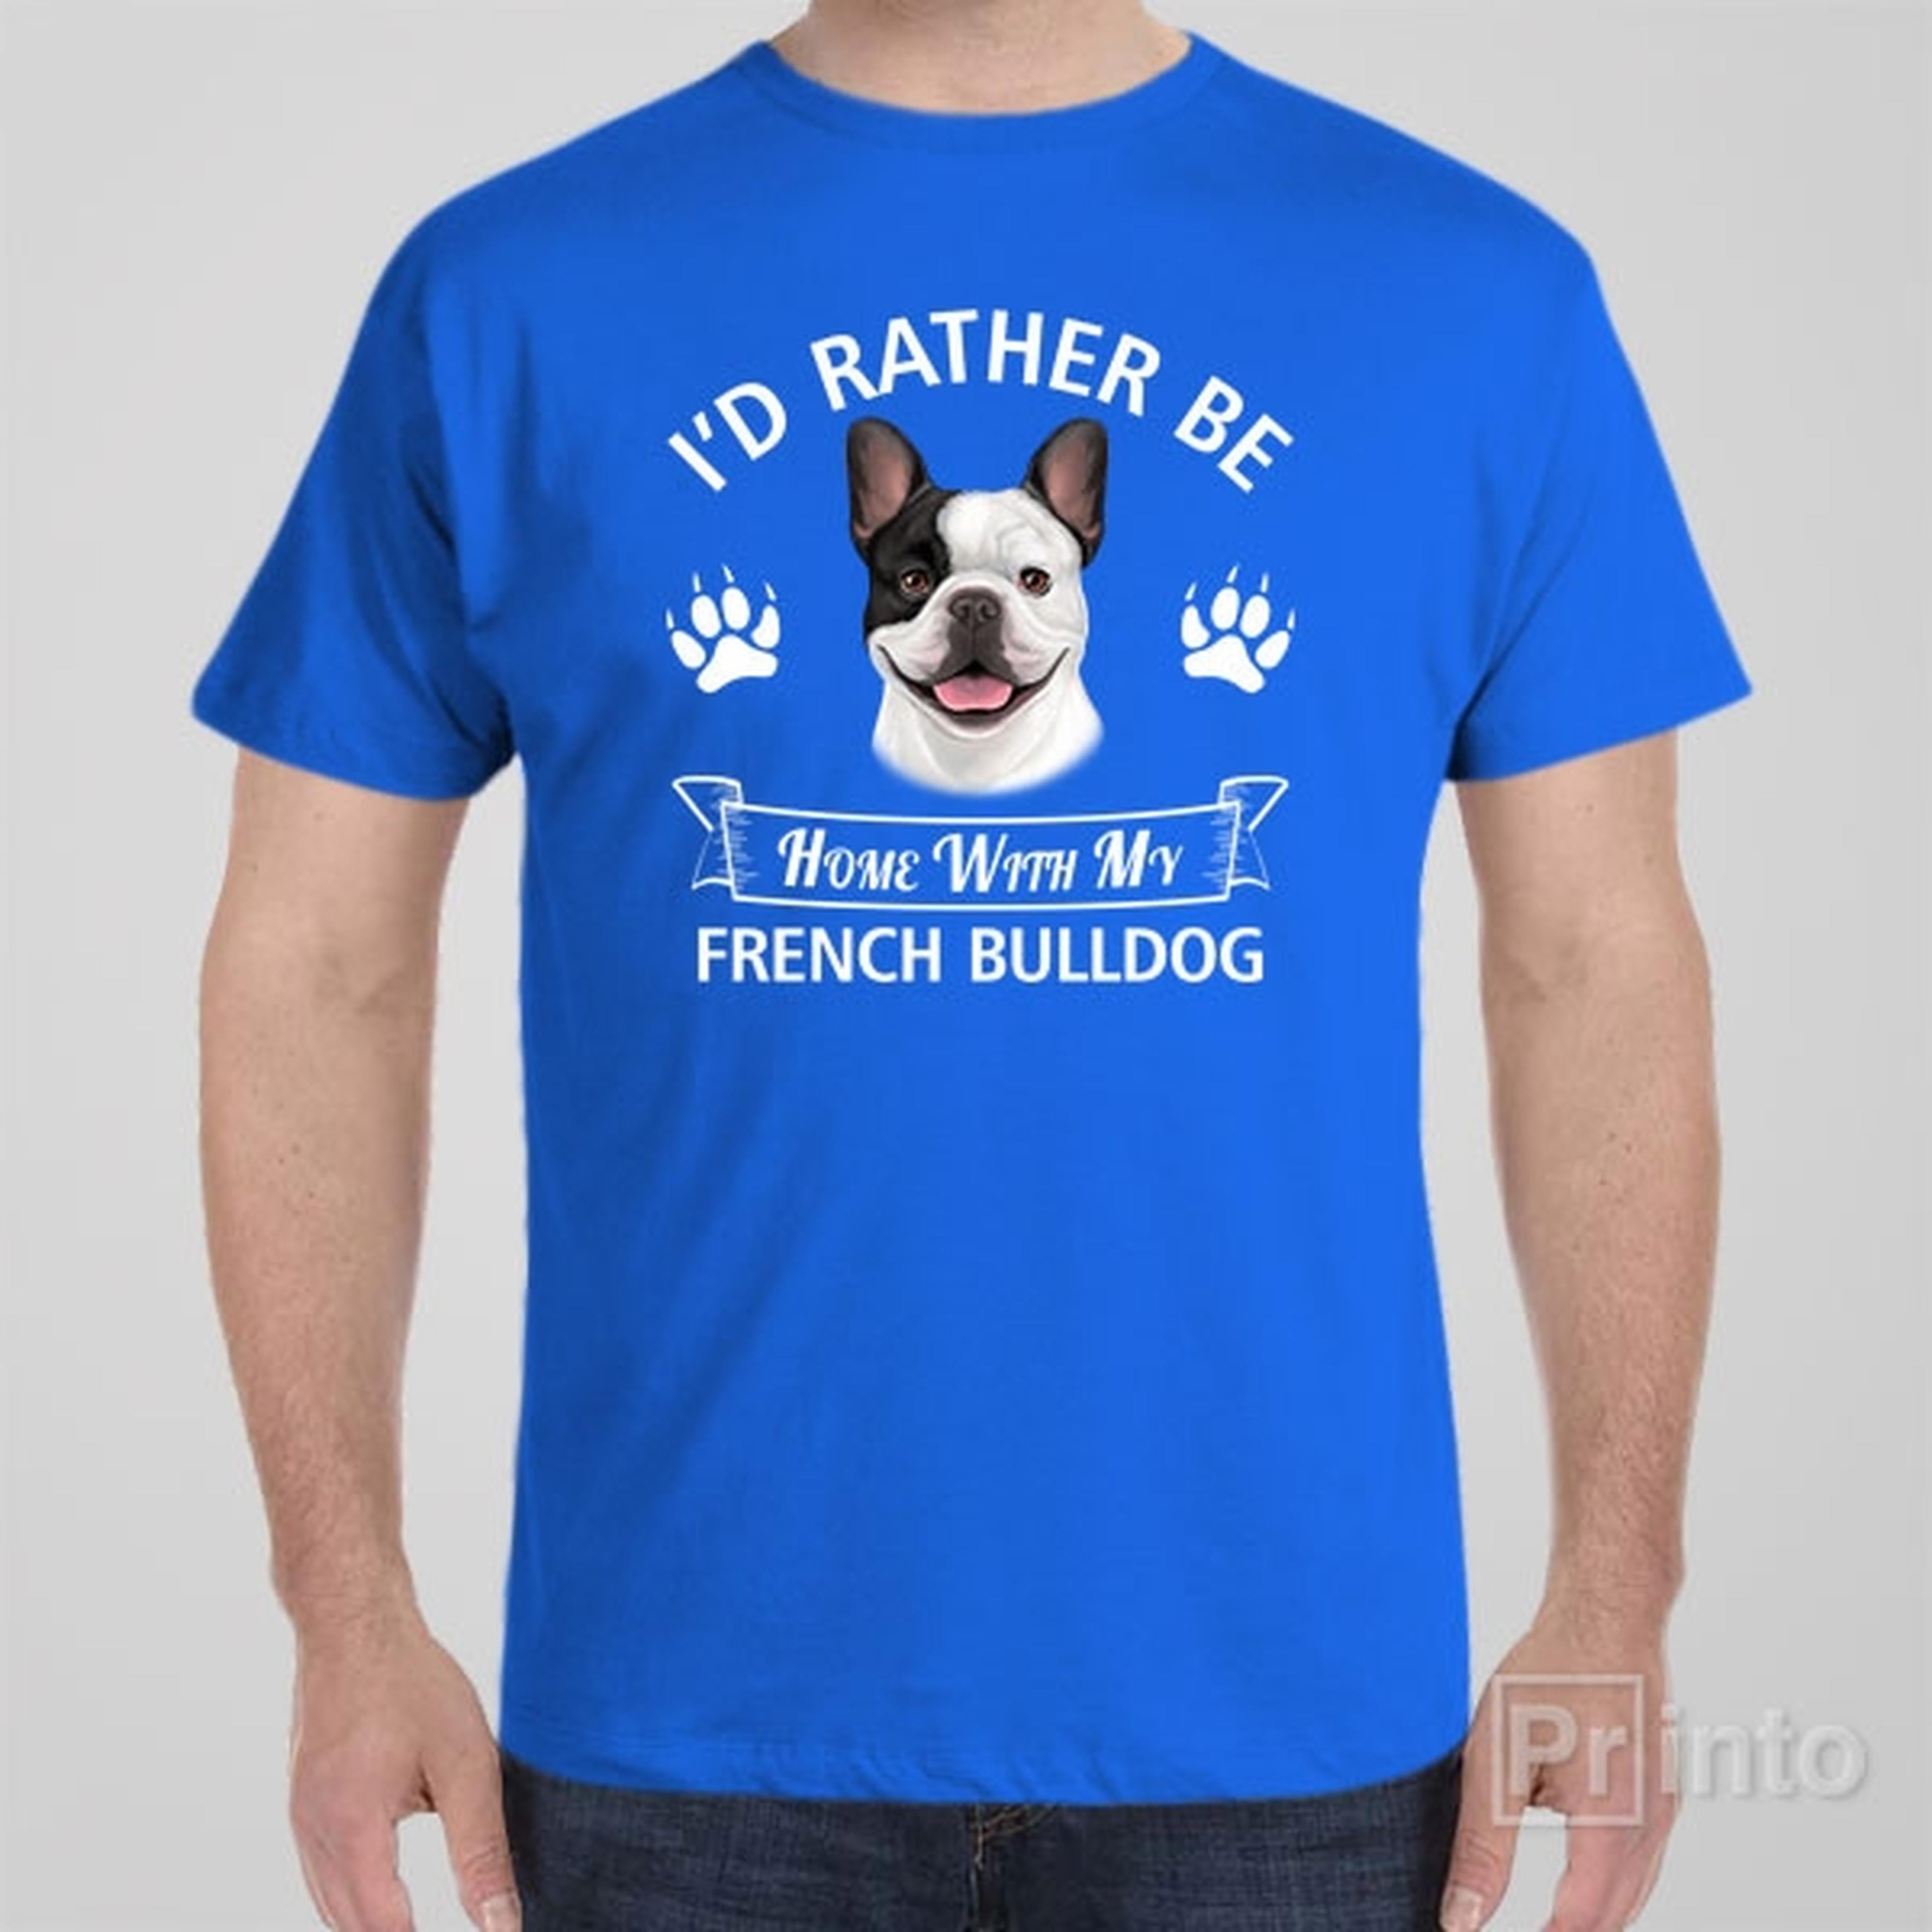 id-rather-stay-home-with-my-french-bulldog-t-shirt